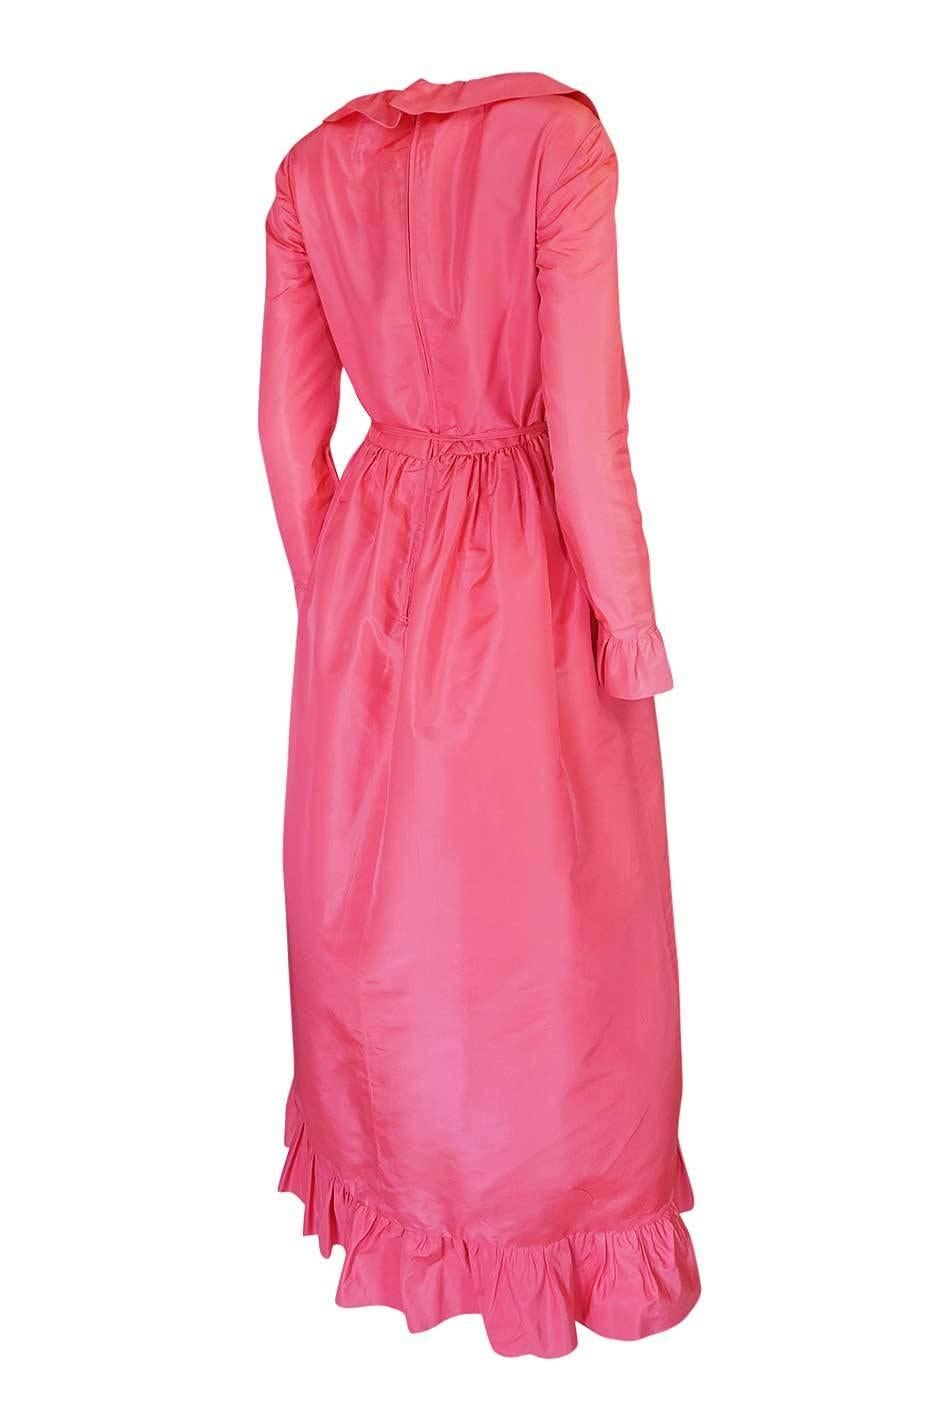 This silk taffeta gown by the Mollie Parnis label has be made form a soft pink silk taffeta. The use of such a bright and unexpected color instantly make it a statement piece. The cut is simple but the ruffled details give it pop. At the neck a